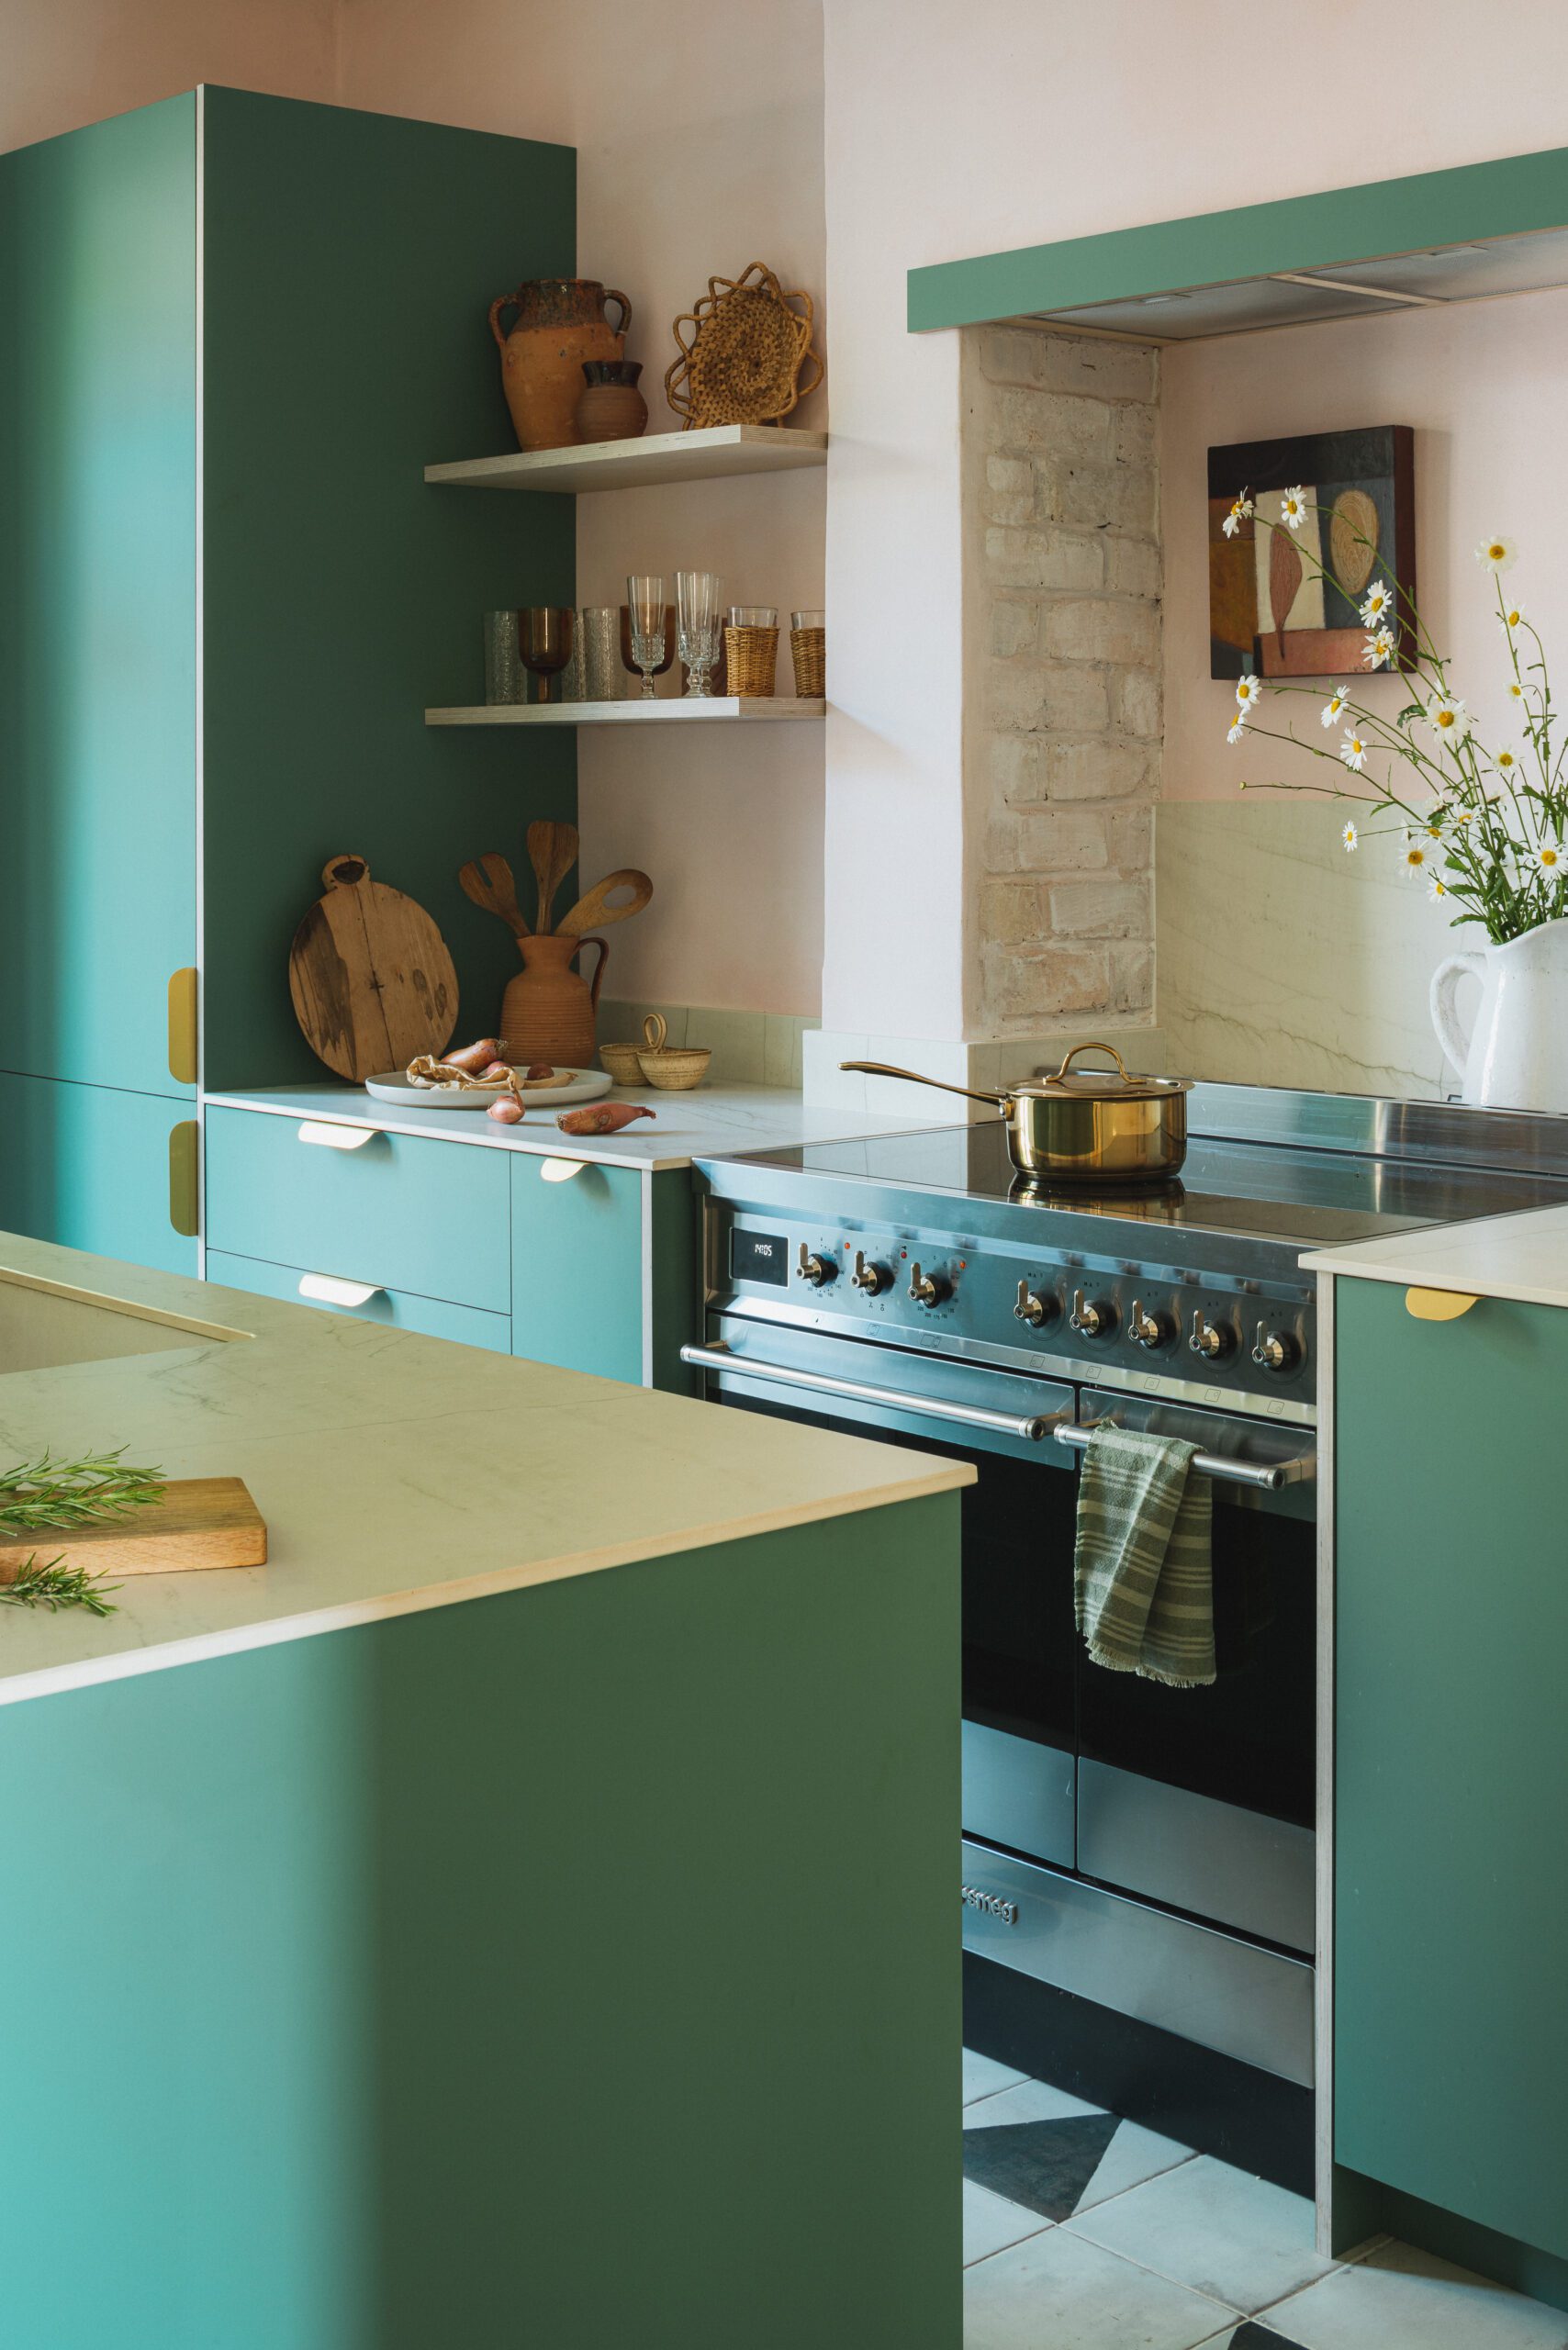 Made by HUSK's Goldney Lodge Kitchen, featuring green kitchen fronts and white/grey worktops.